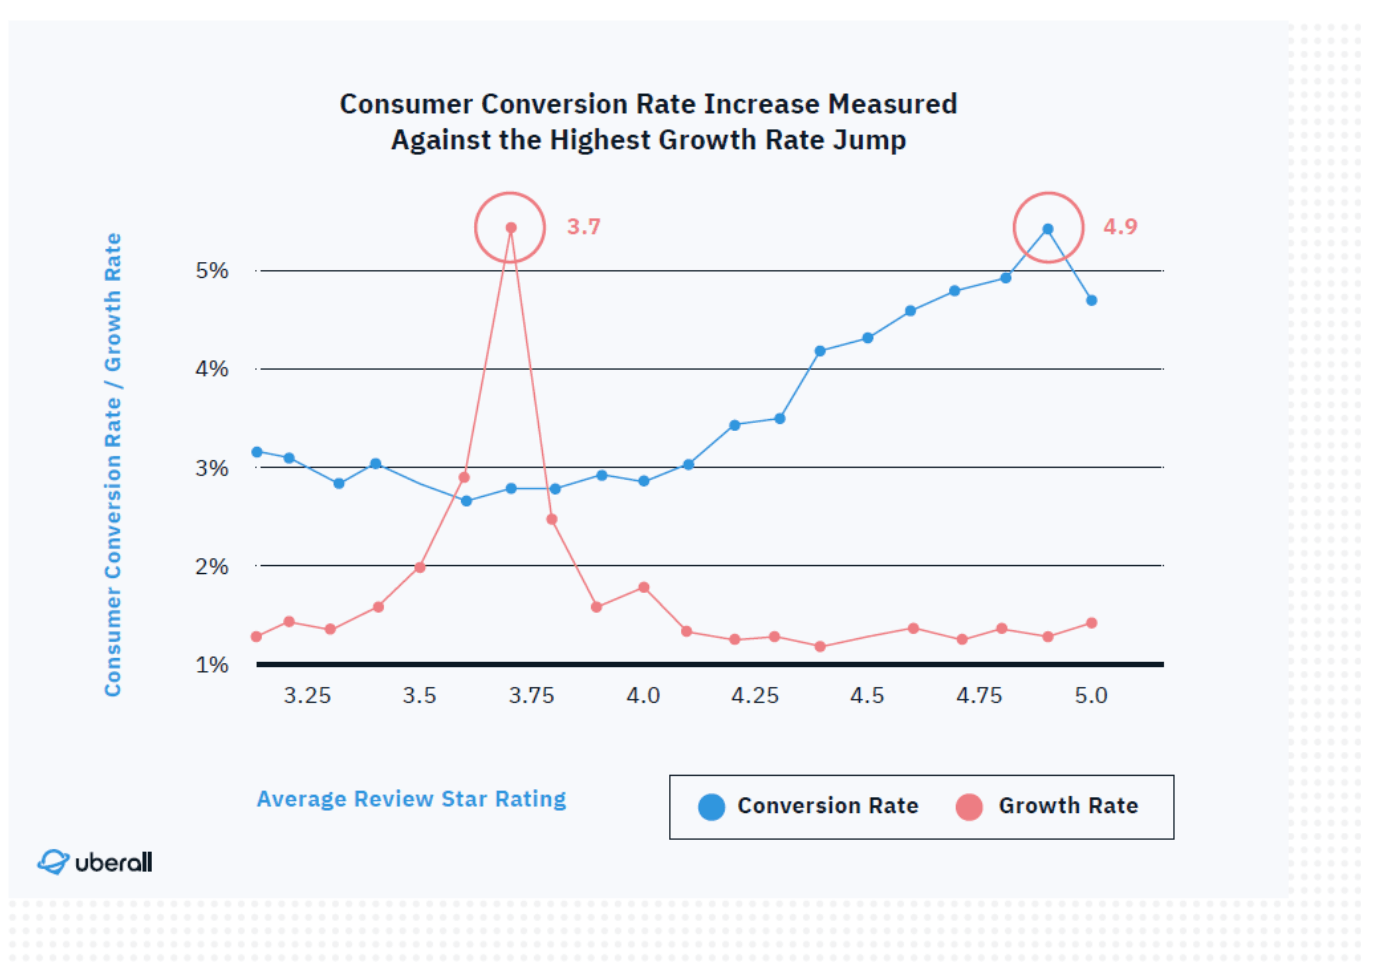 Review management: a 3.7 star rating results in 120% conversion growth, while 4.9 generates max conversion.